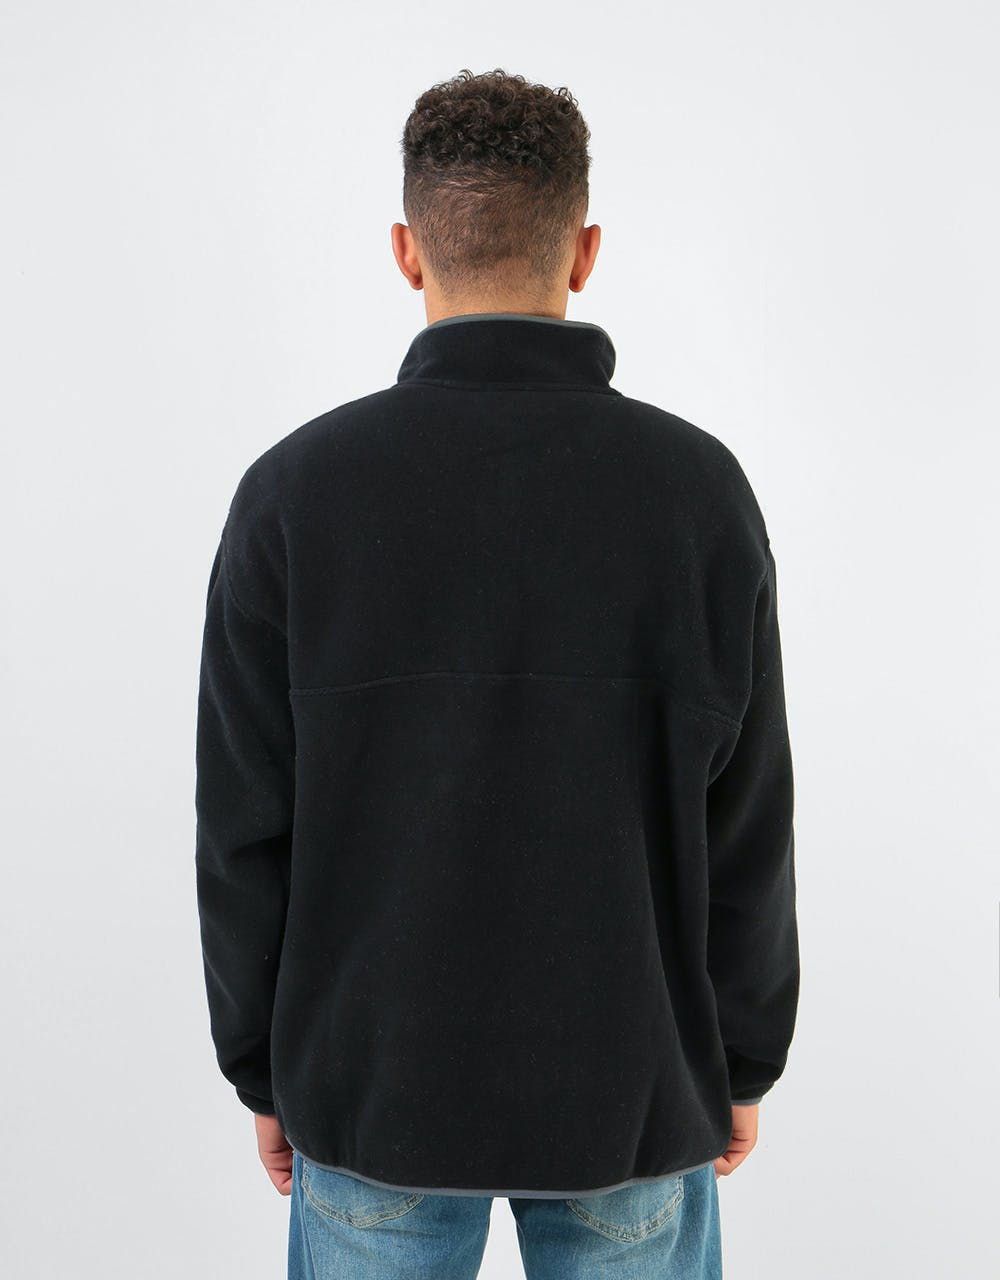 Patagonia Synchilla Snap-T Pullover - Black w/ Forge Grey